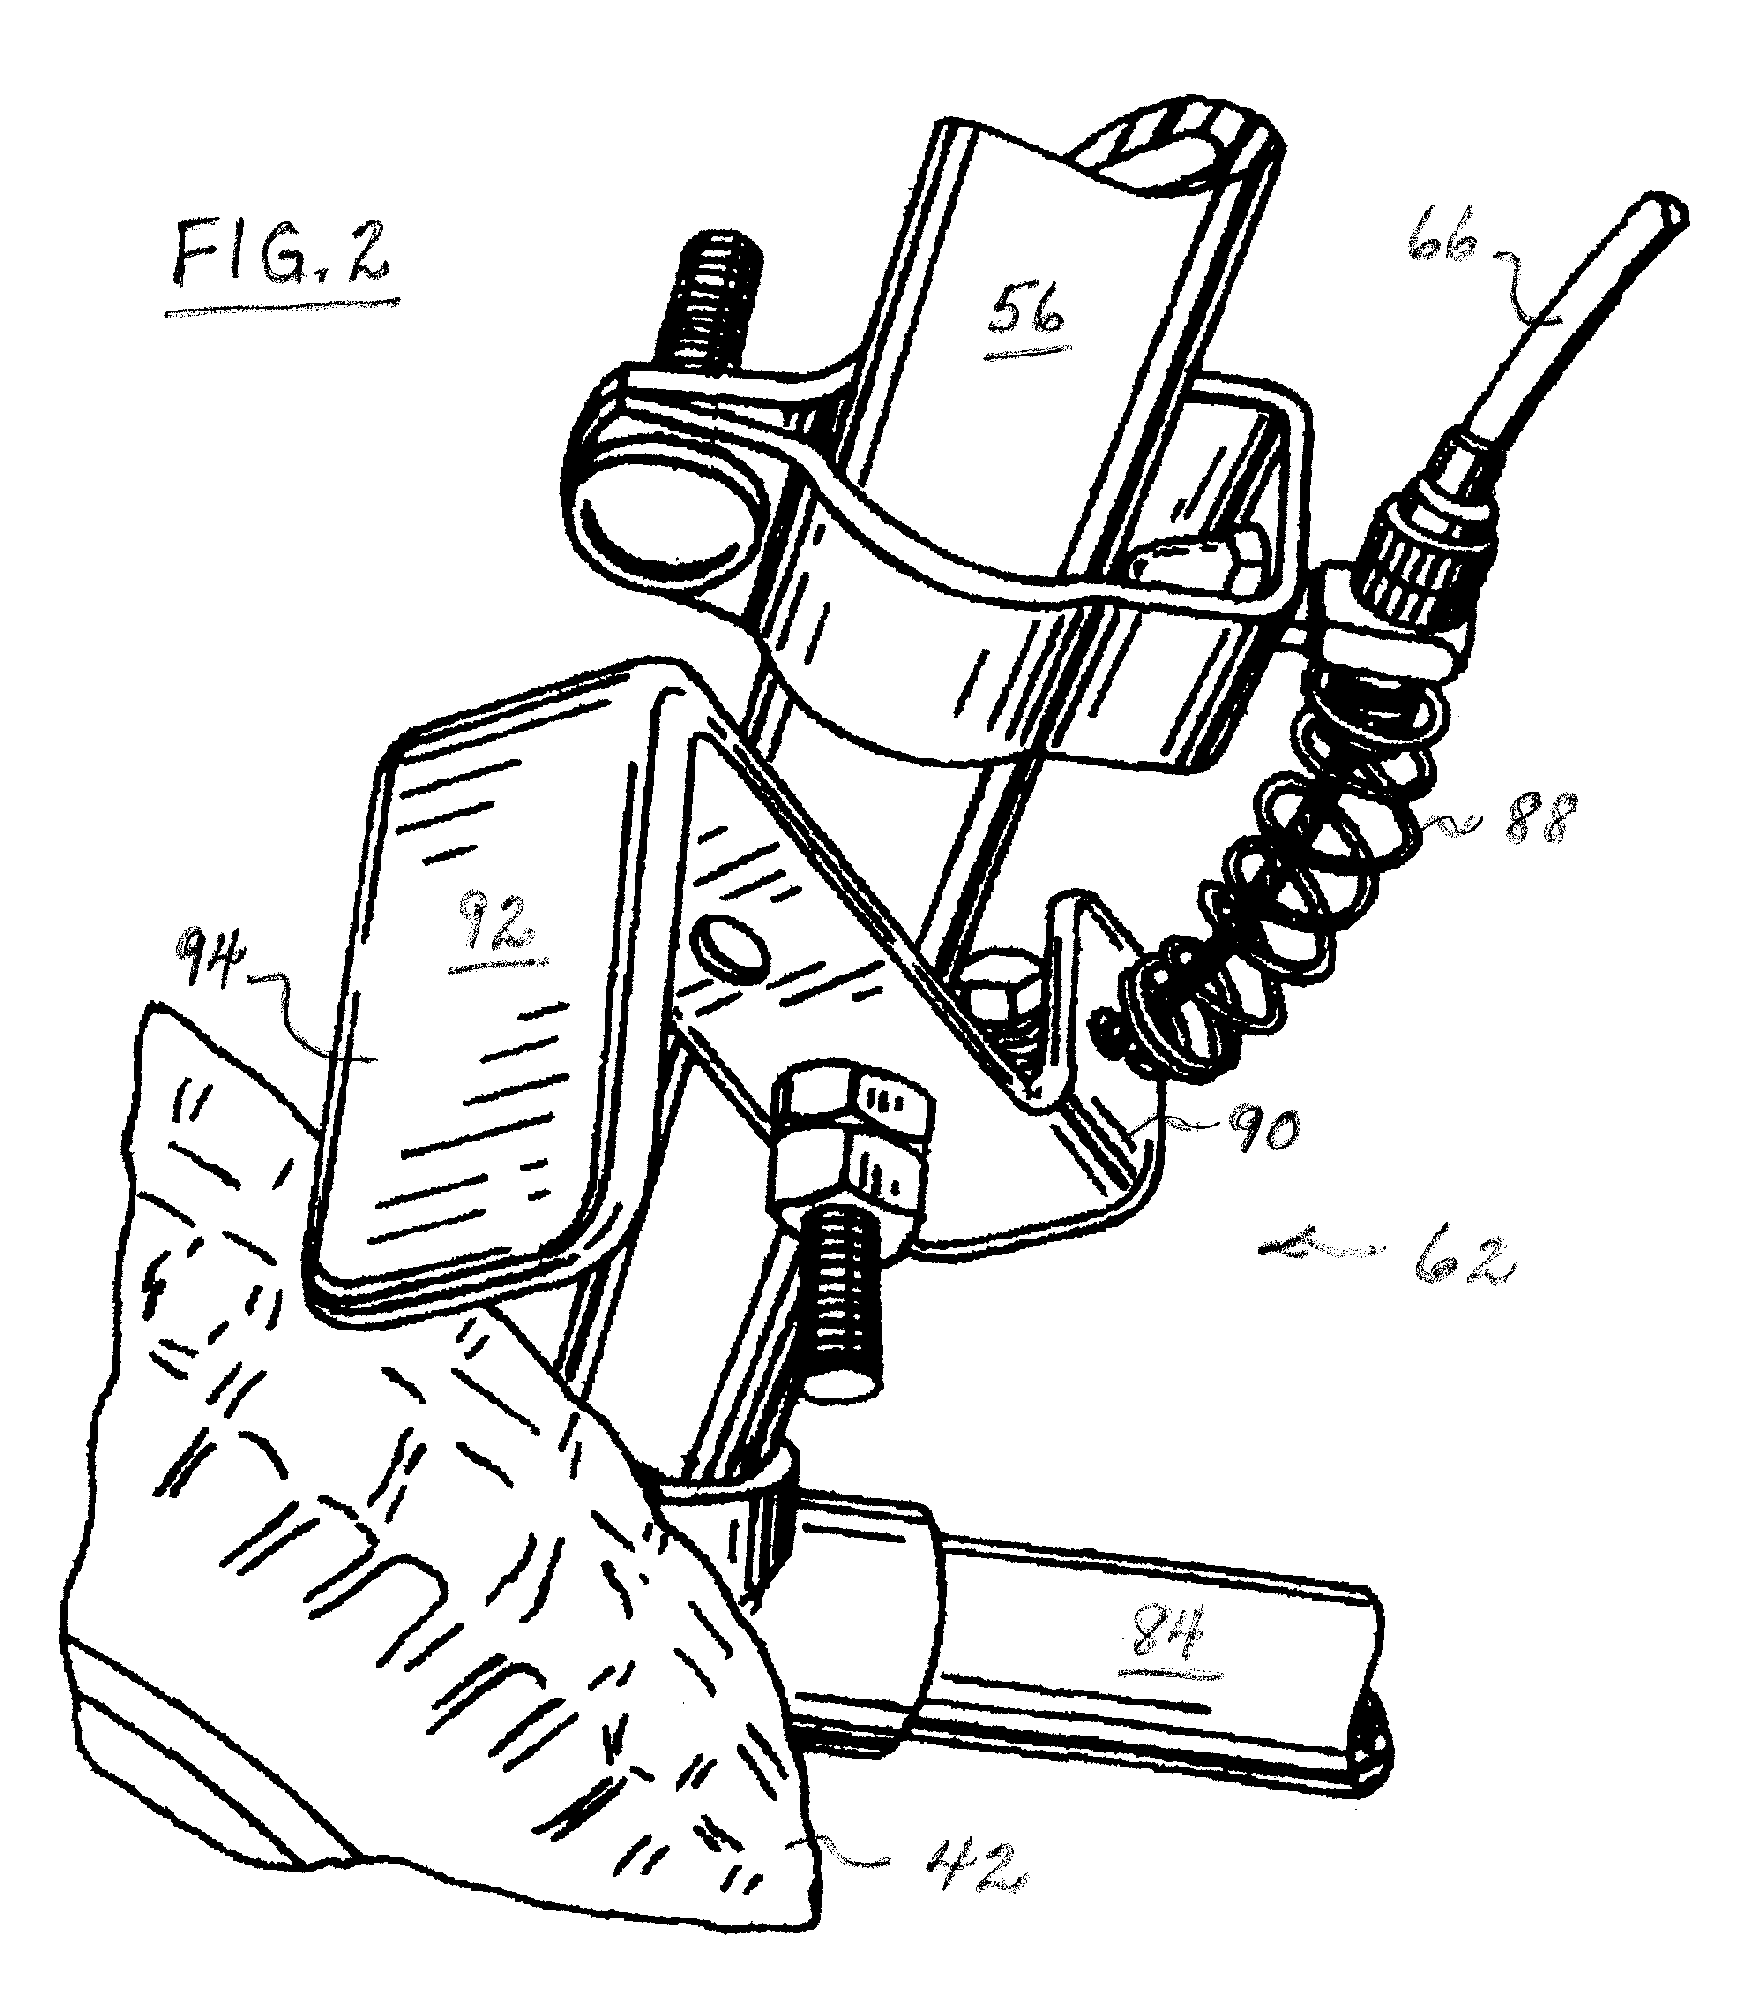 Assisted walking device